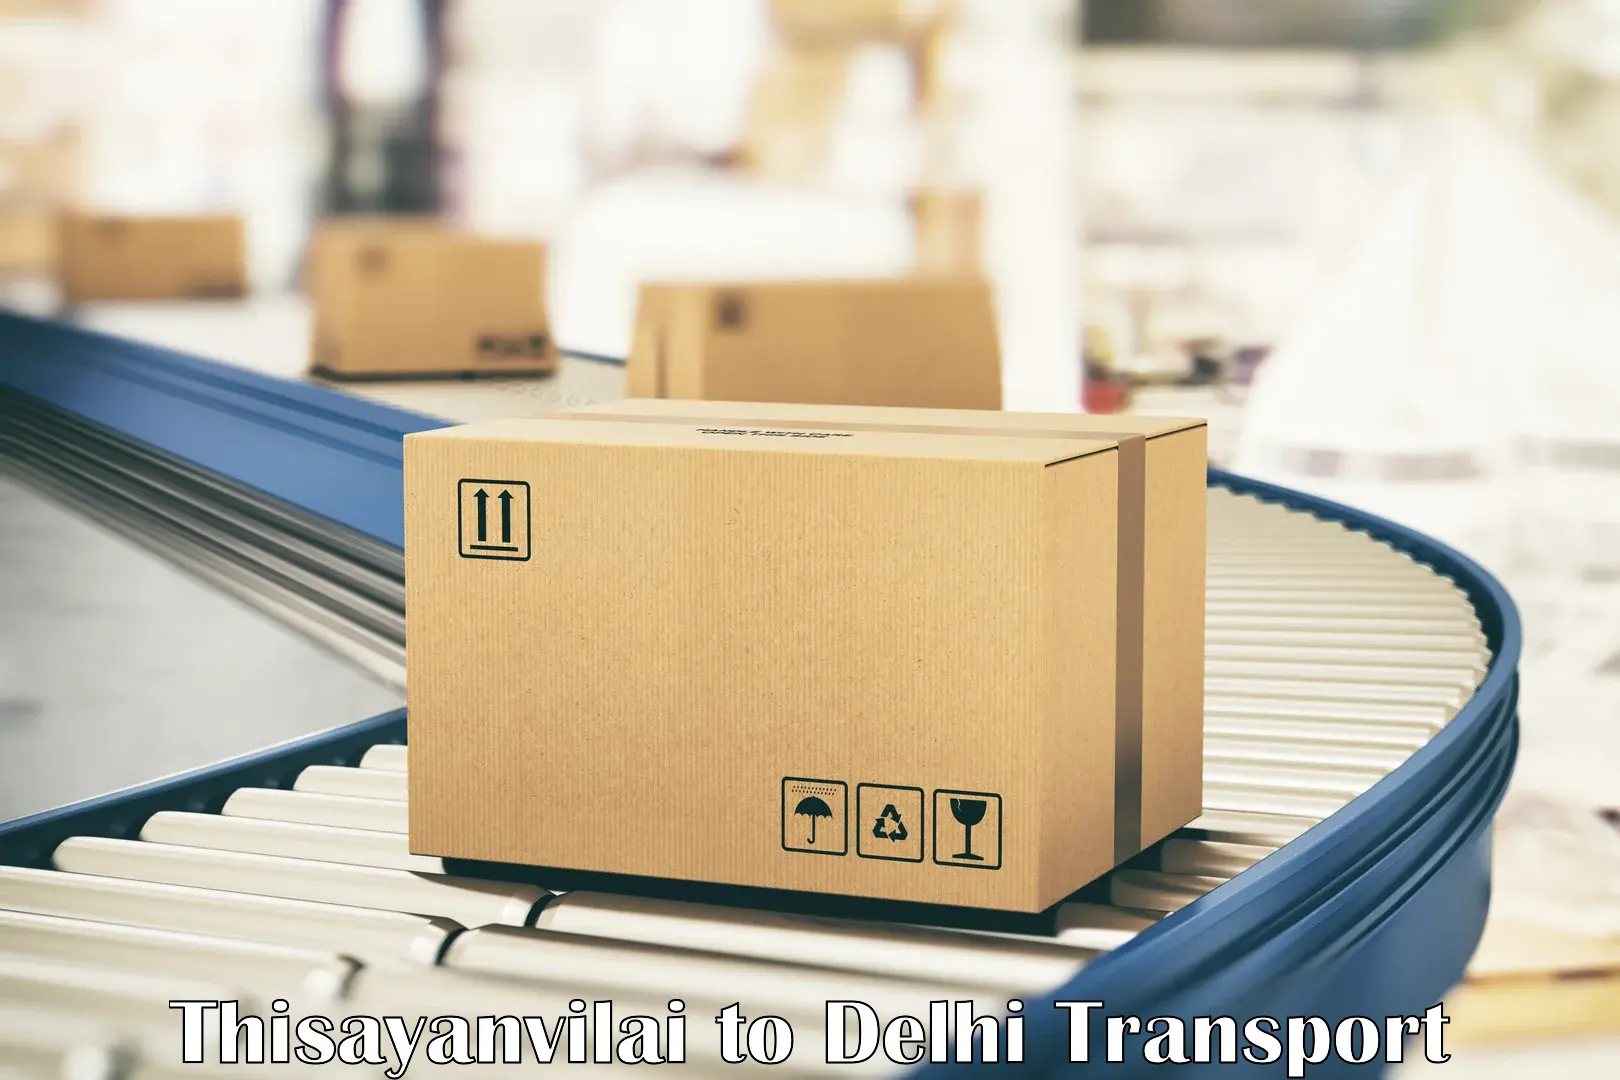 Commercial transport service Thisayanvilai to IIT Delhi